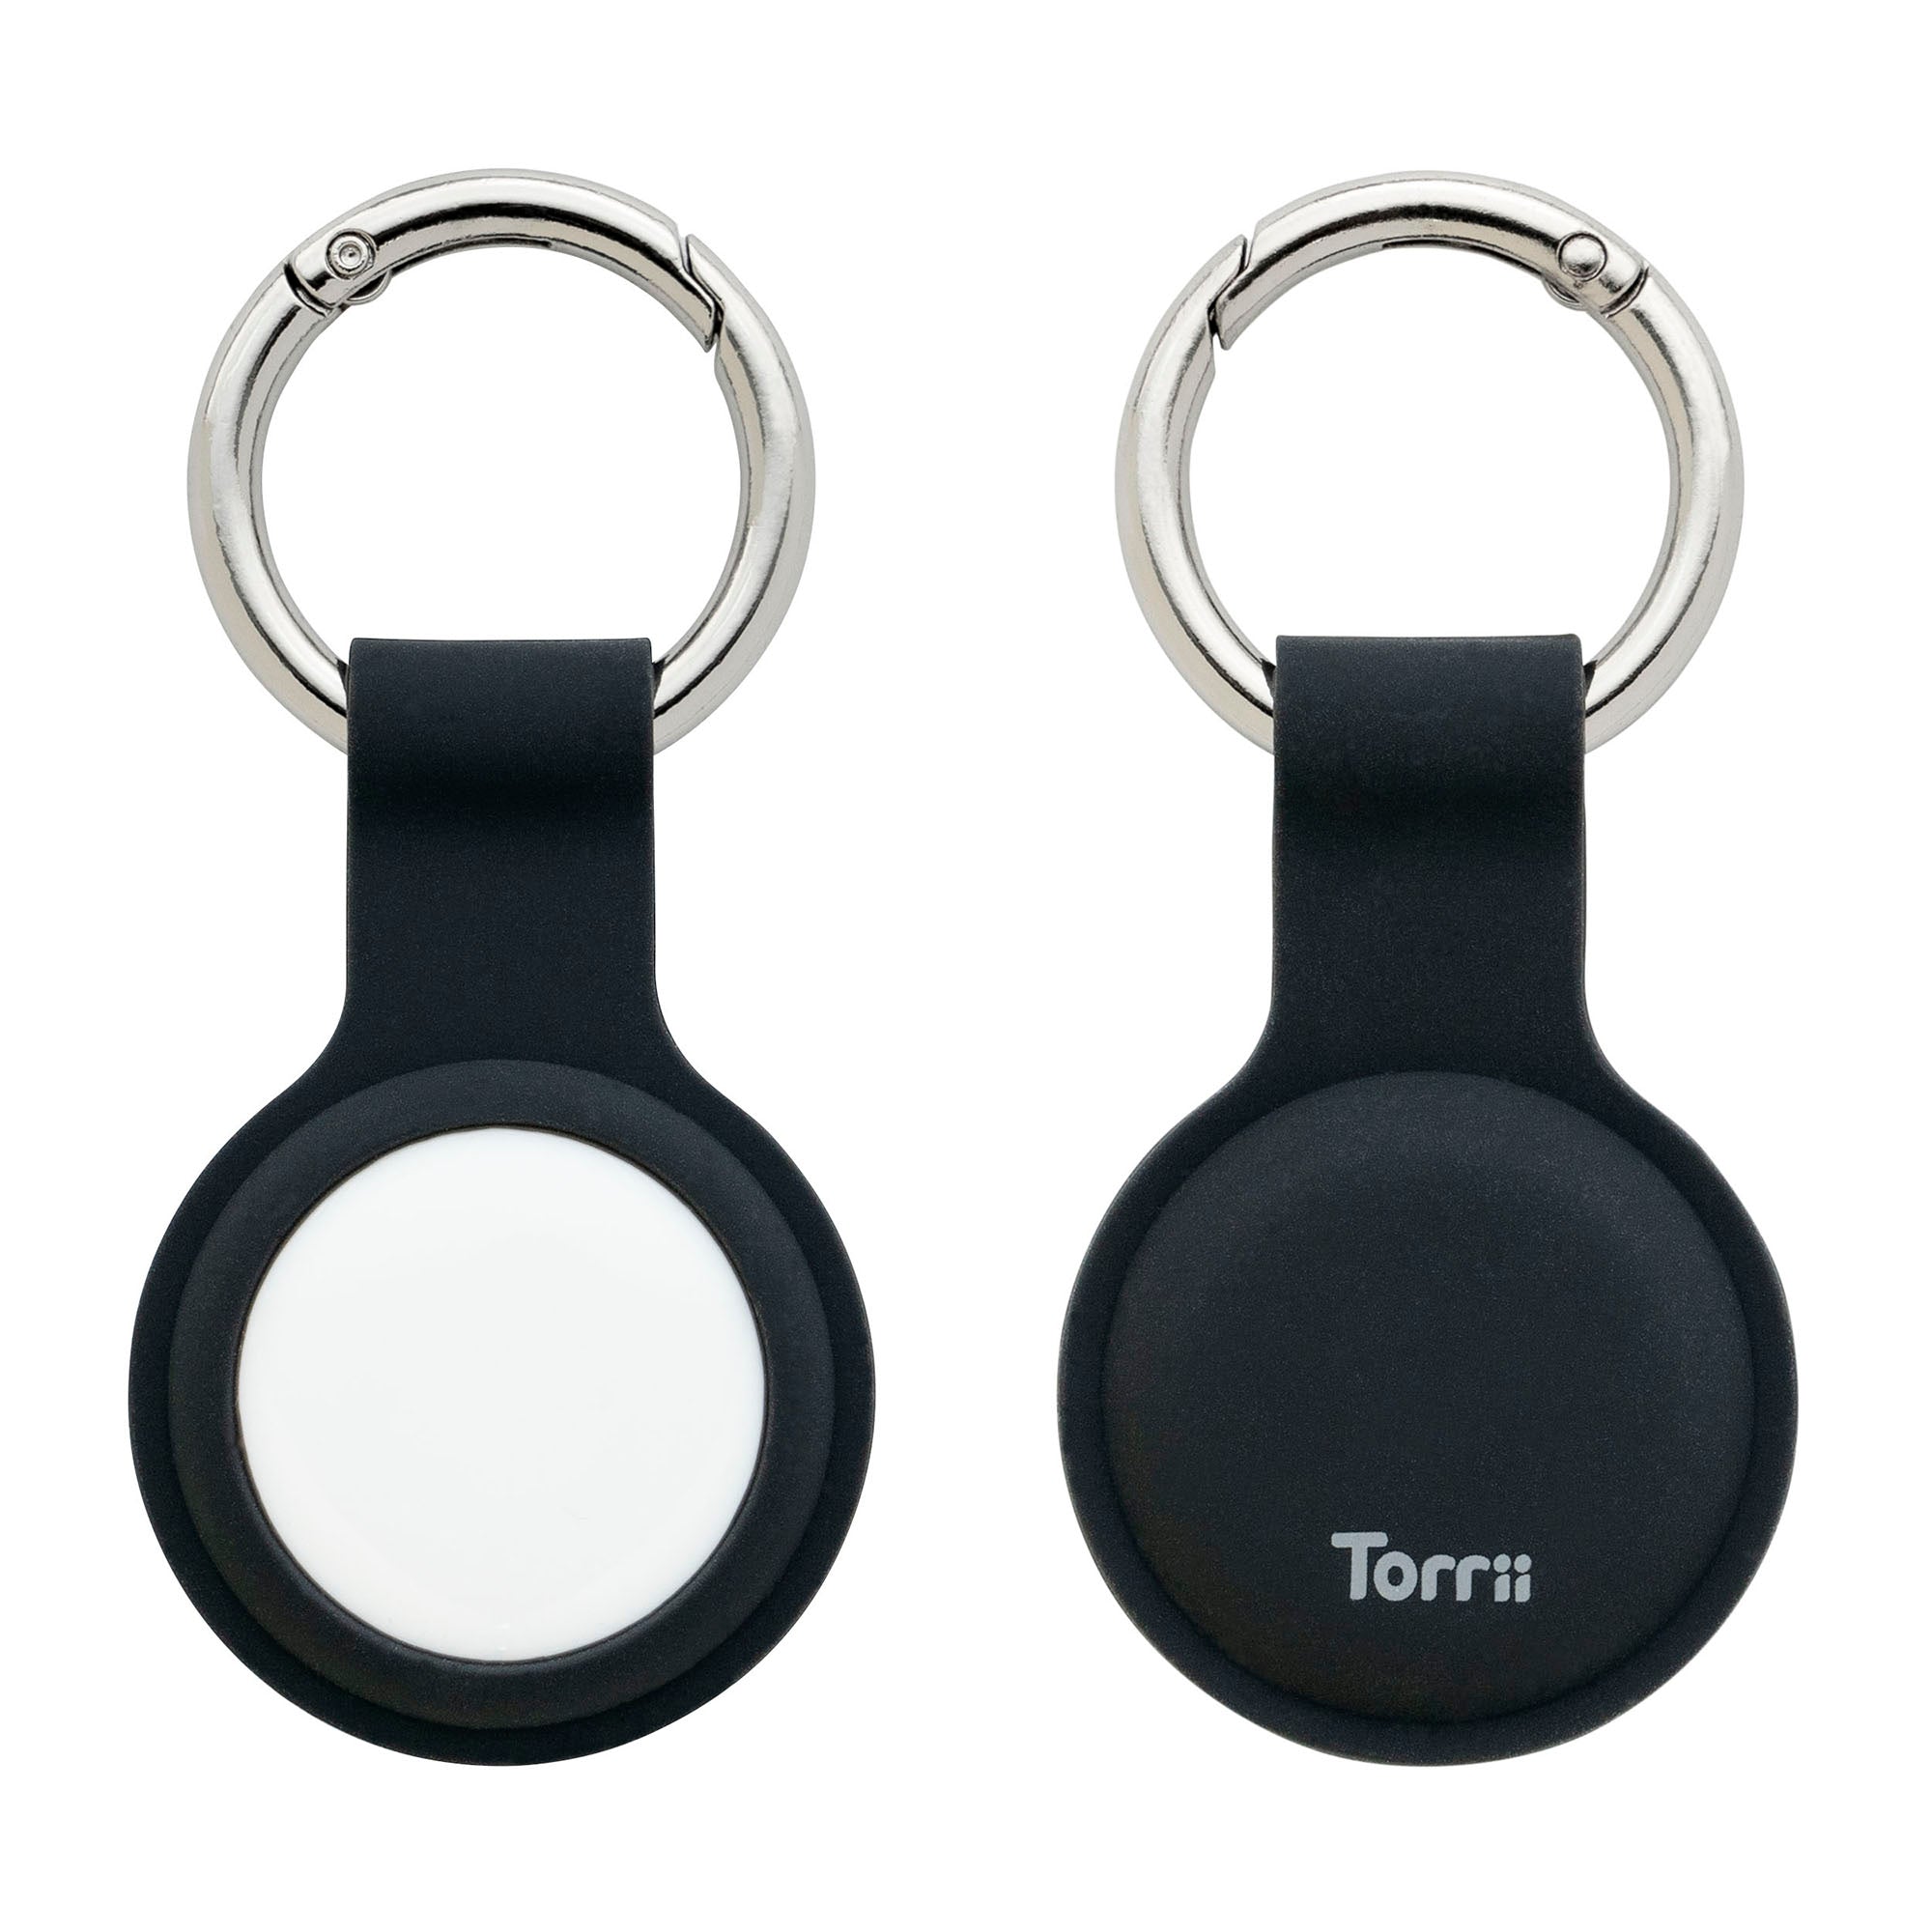 Torrii Bonjelly Silicone Key Ring For Apple Airtag - Black